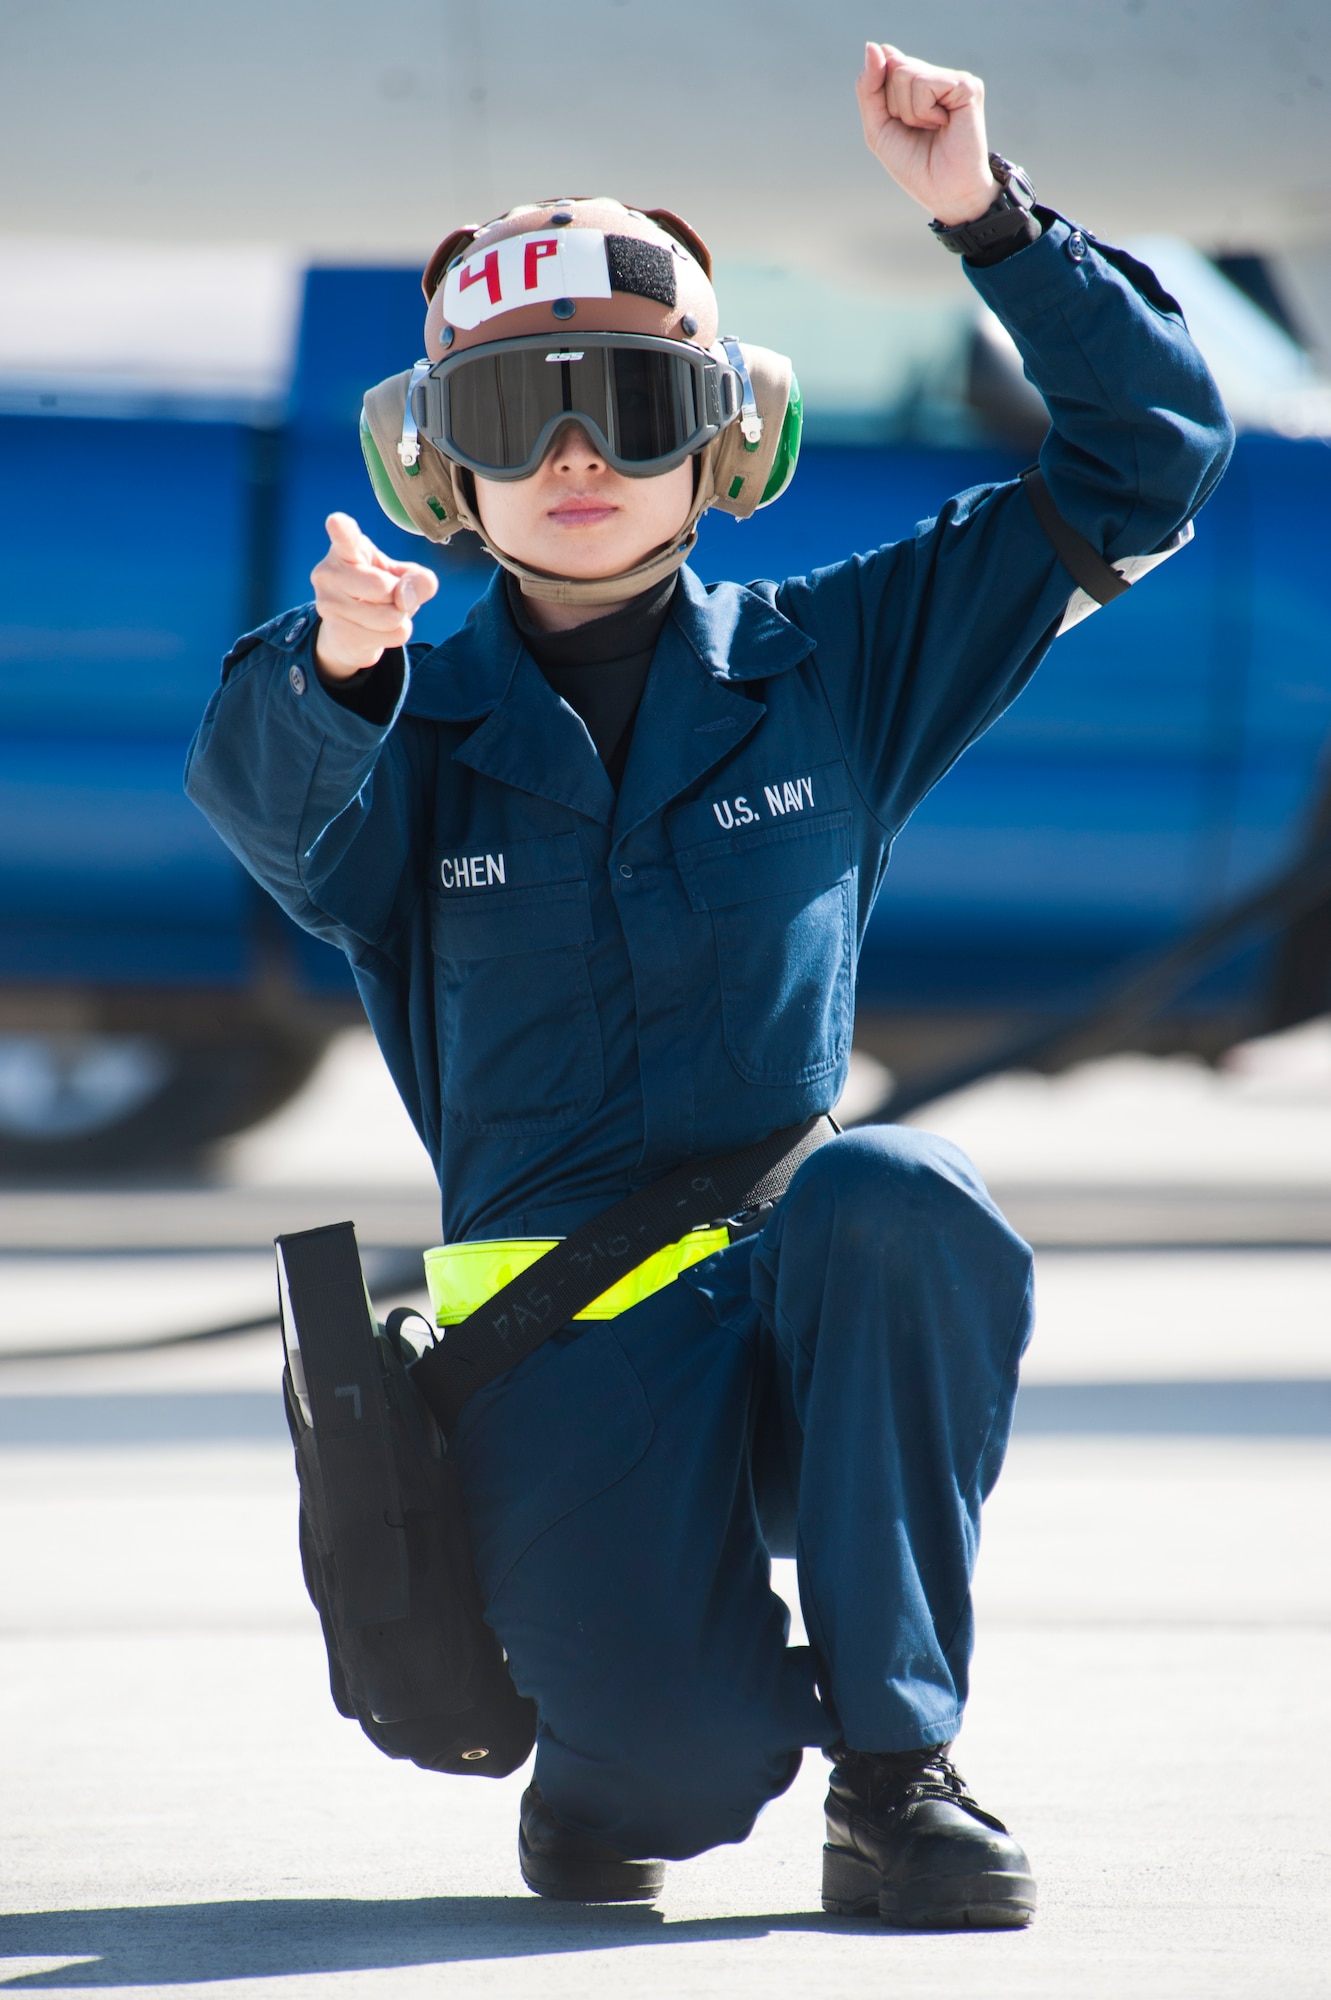 U.S. Navy Airman Zhou Chen, Strike Fighter Squadron 25 (VFA-25), Naval Air Station, Lemoore, Calif., plane captain, signals to an F/A18E Hornet pilot to hold safely on the Nellis Air Force Base, Nev. flight line Jan. 25, 2013.  The VFA-25 participation in the U.S. Air Force's Red Flag exercise builds allied air force cooperation and mutual support. (U.S. Air Force photo by Lawrence Crespo)